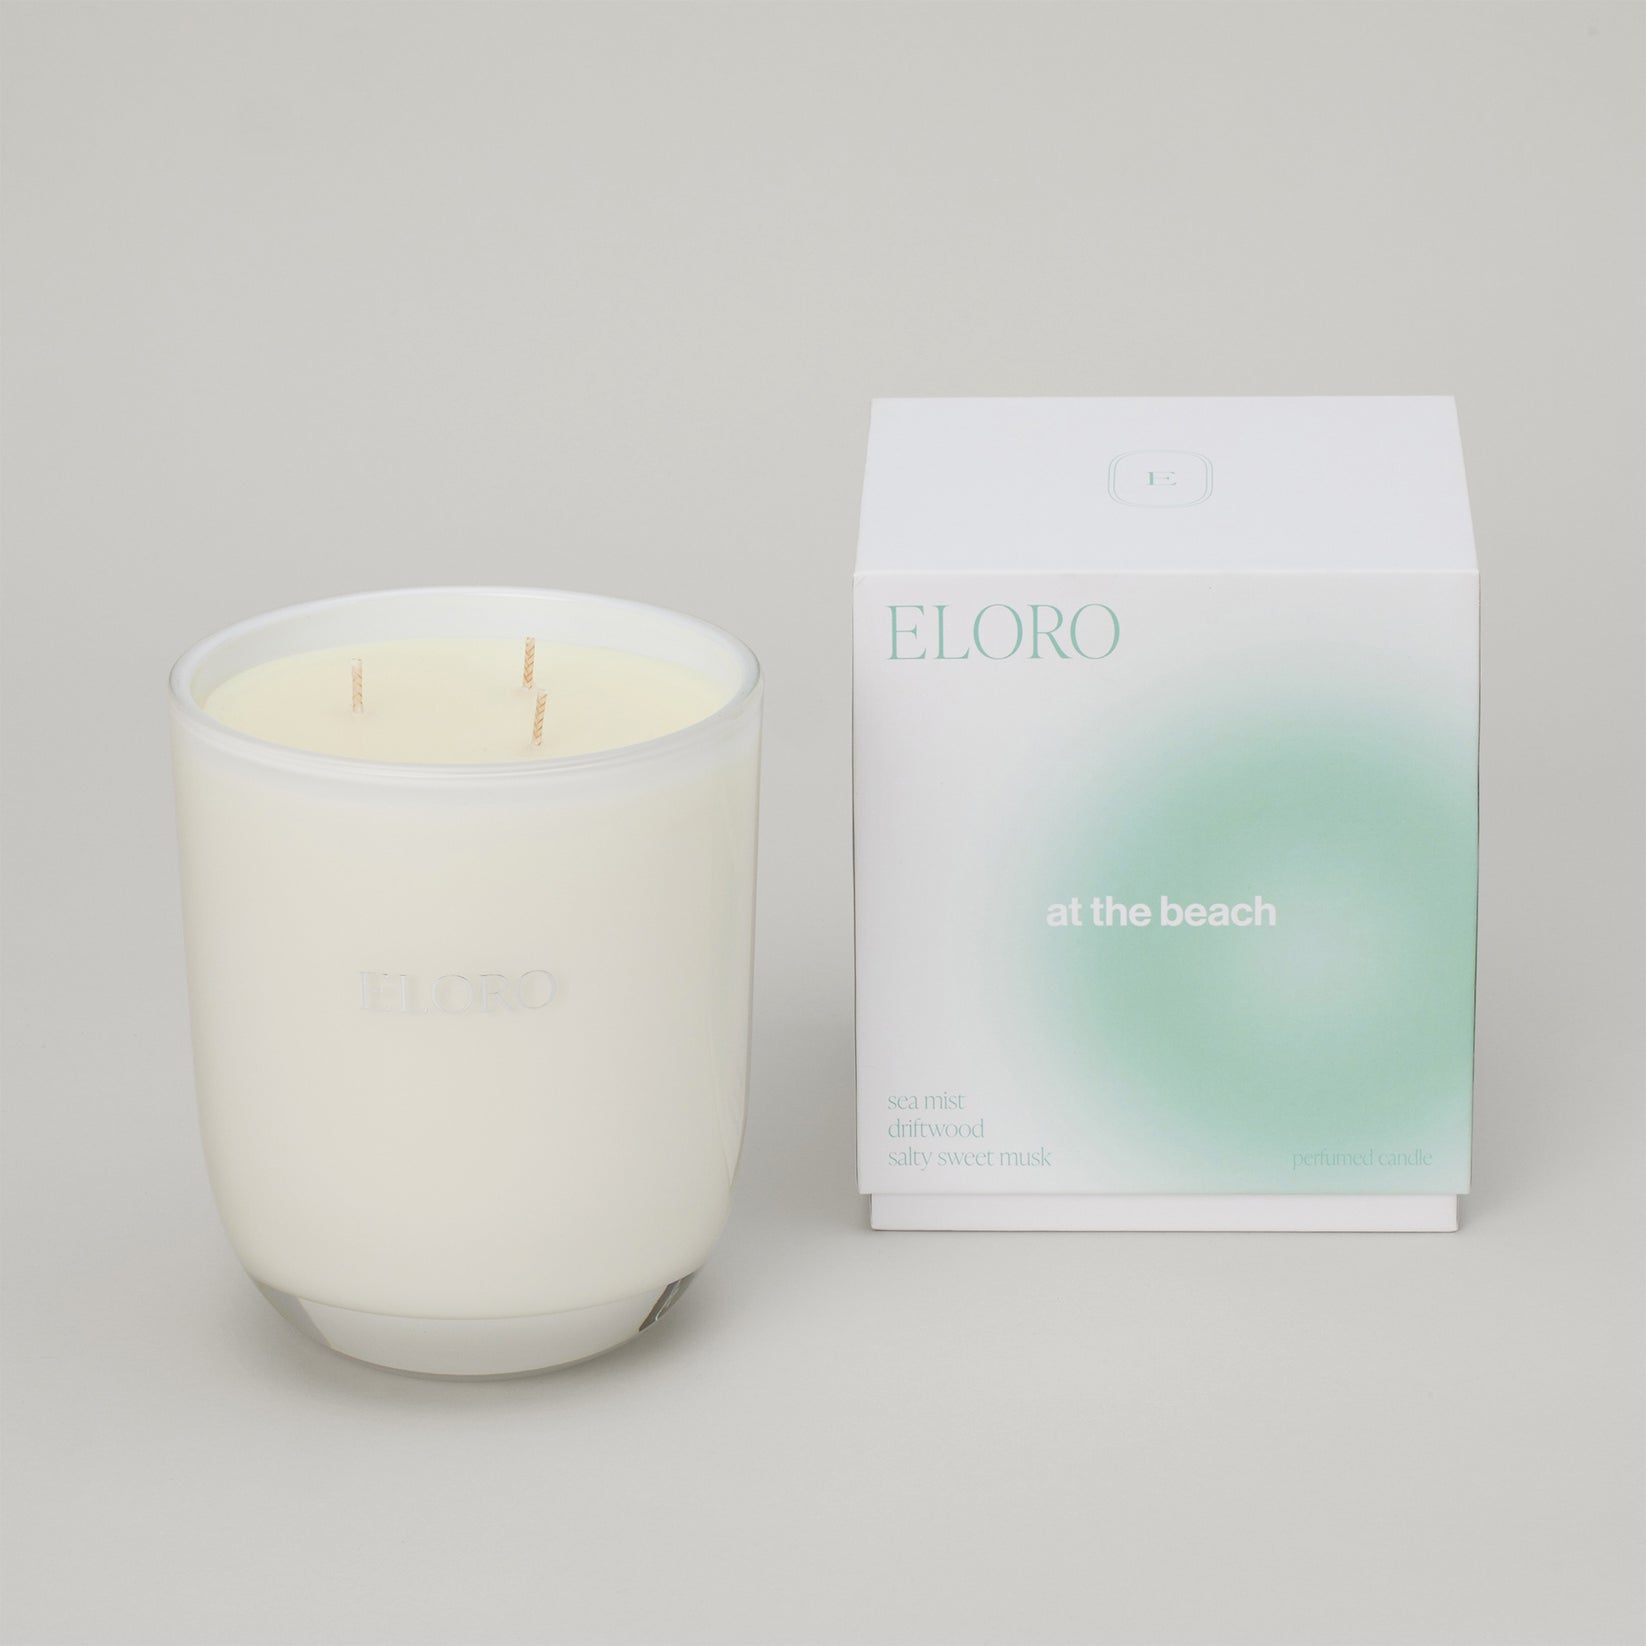 Scented Candle - Three Wick